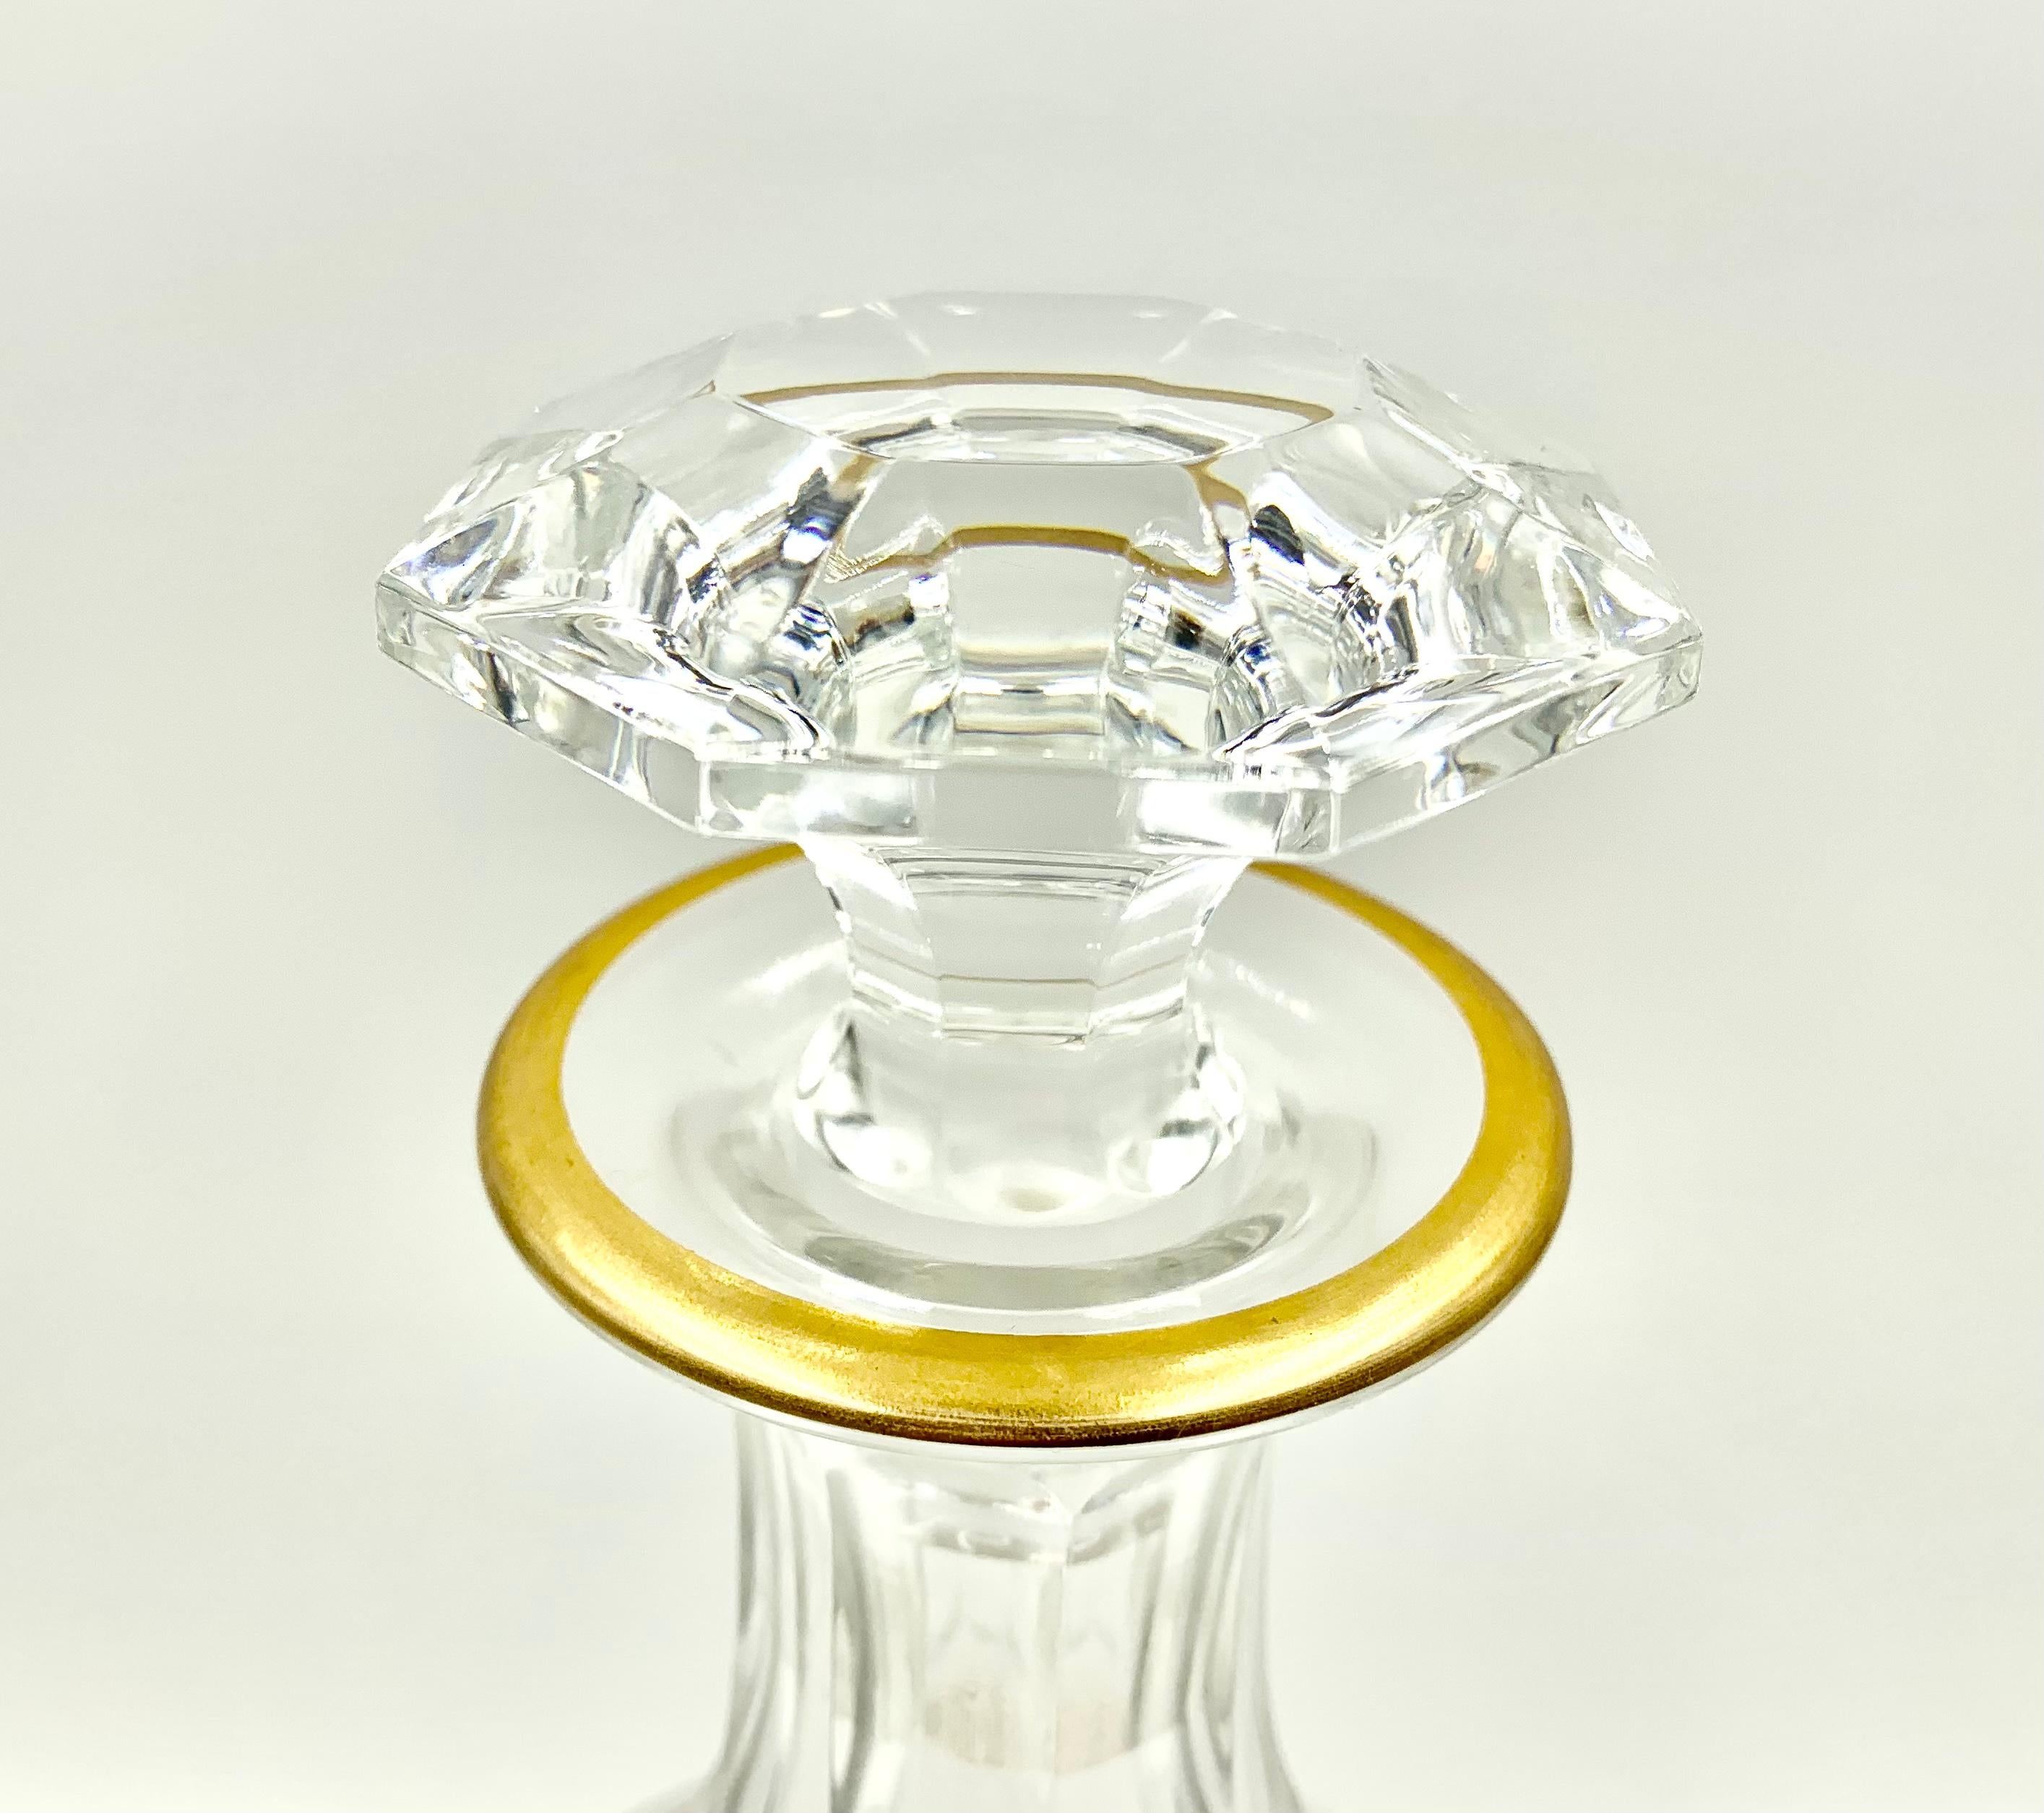 French Rare Estate Baccarat Eldorado Neoclassical Style Crystal and Gold Decanter For Sale